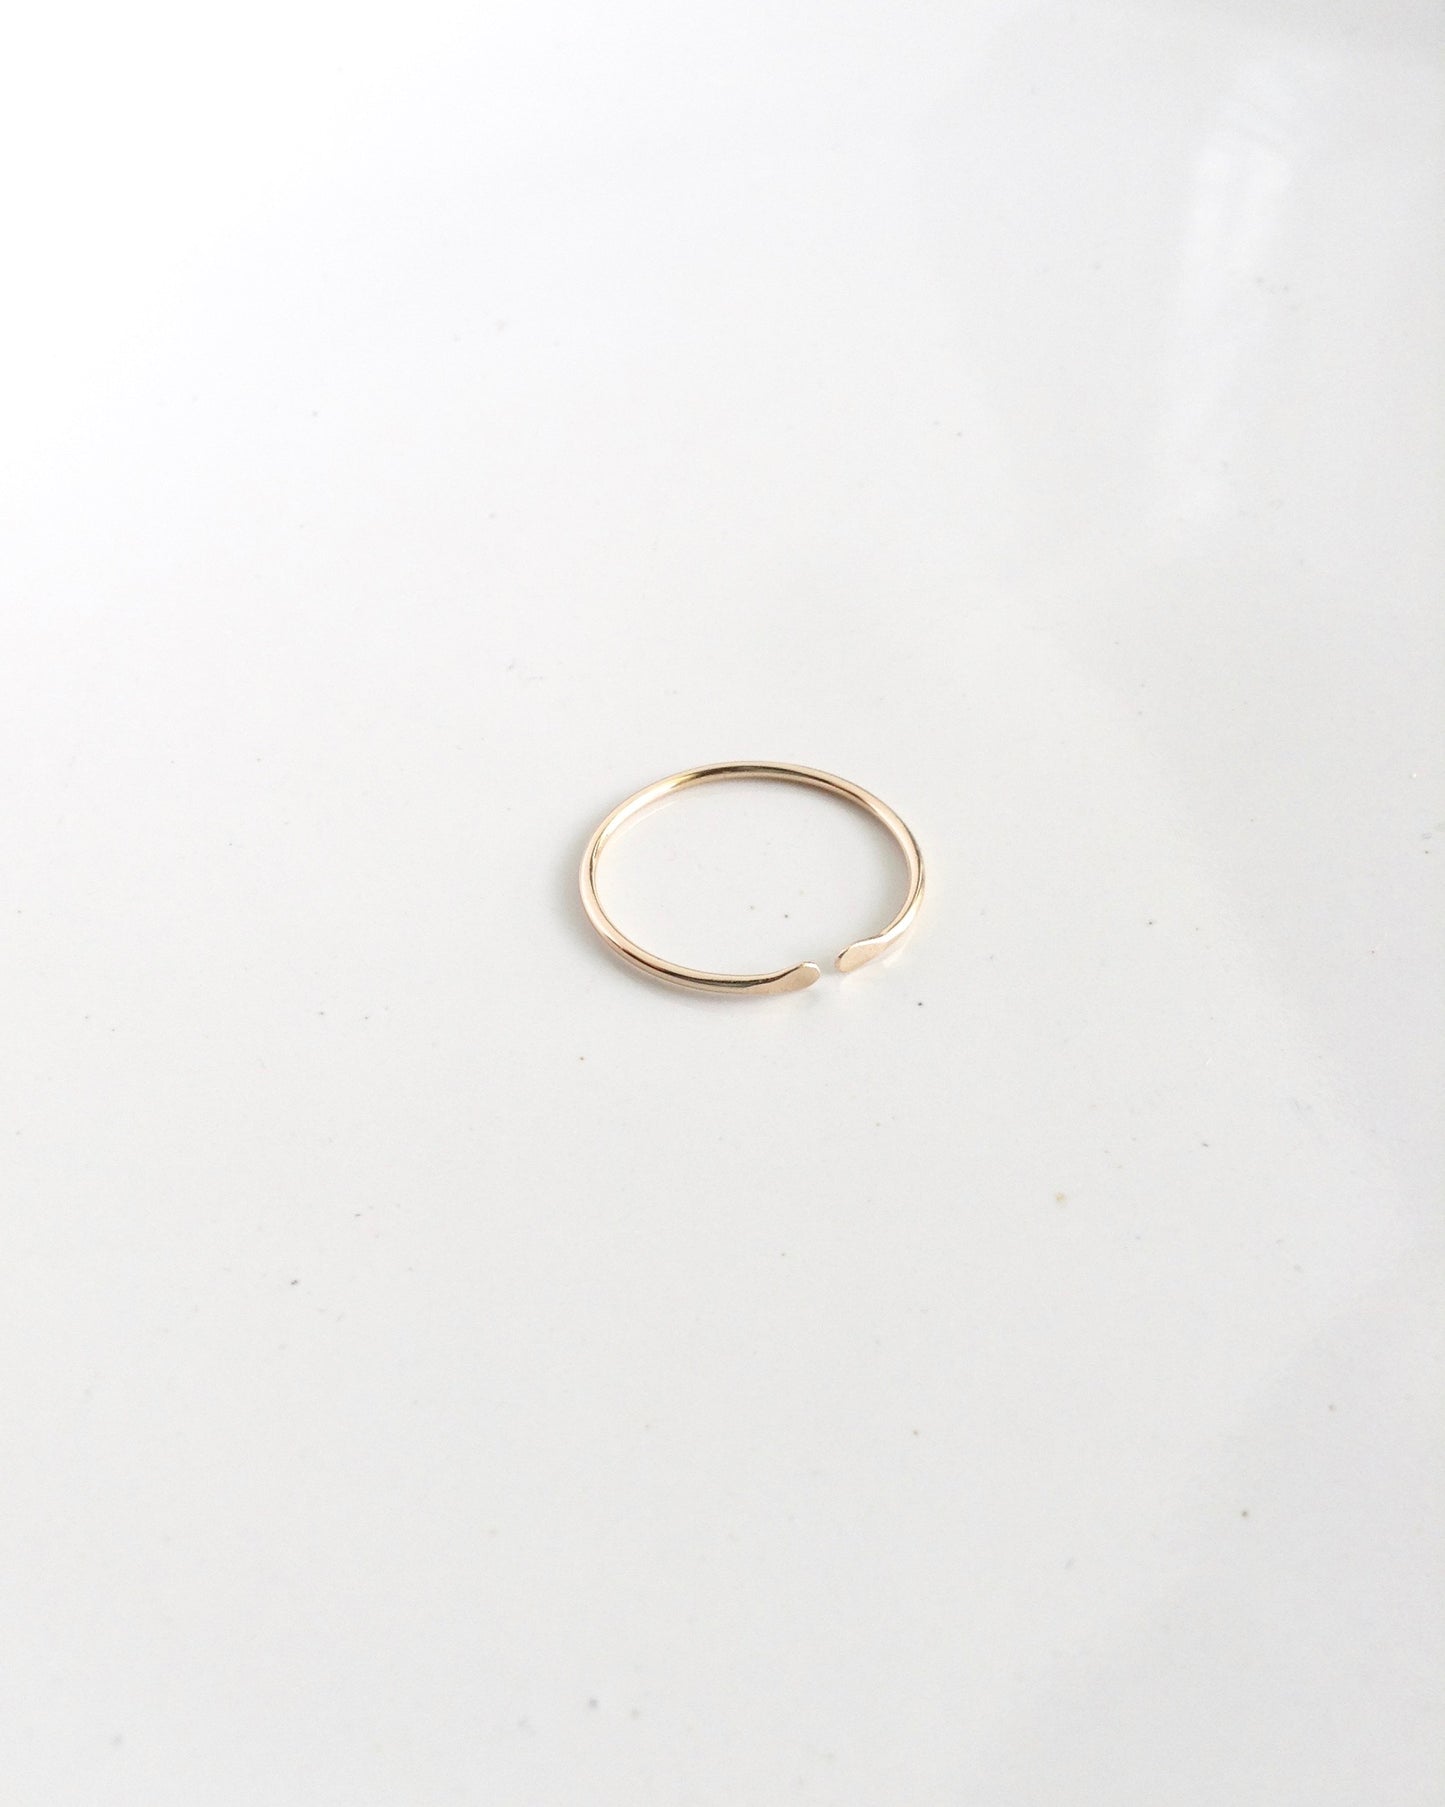 Minimalist Stacking Ring in Sterling Silver Gold Filled or Rose Gold Filled | Simple Delicate Ring | IB Jewelry